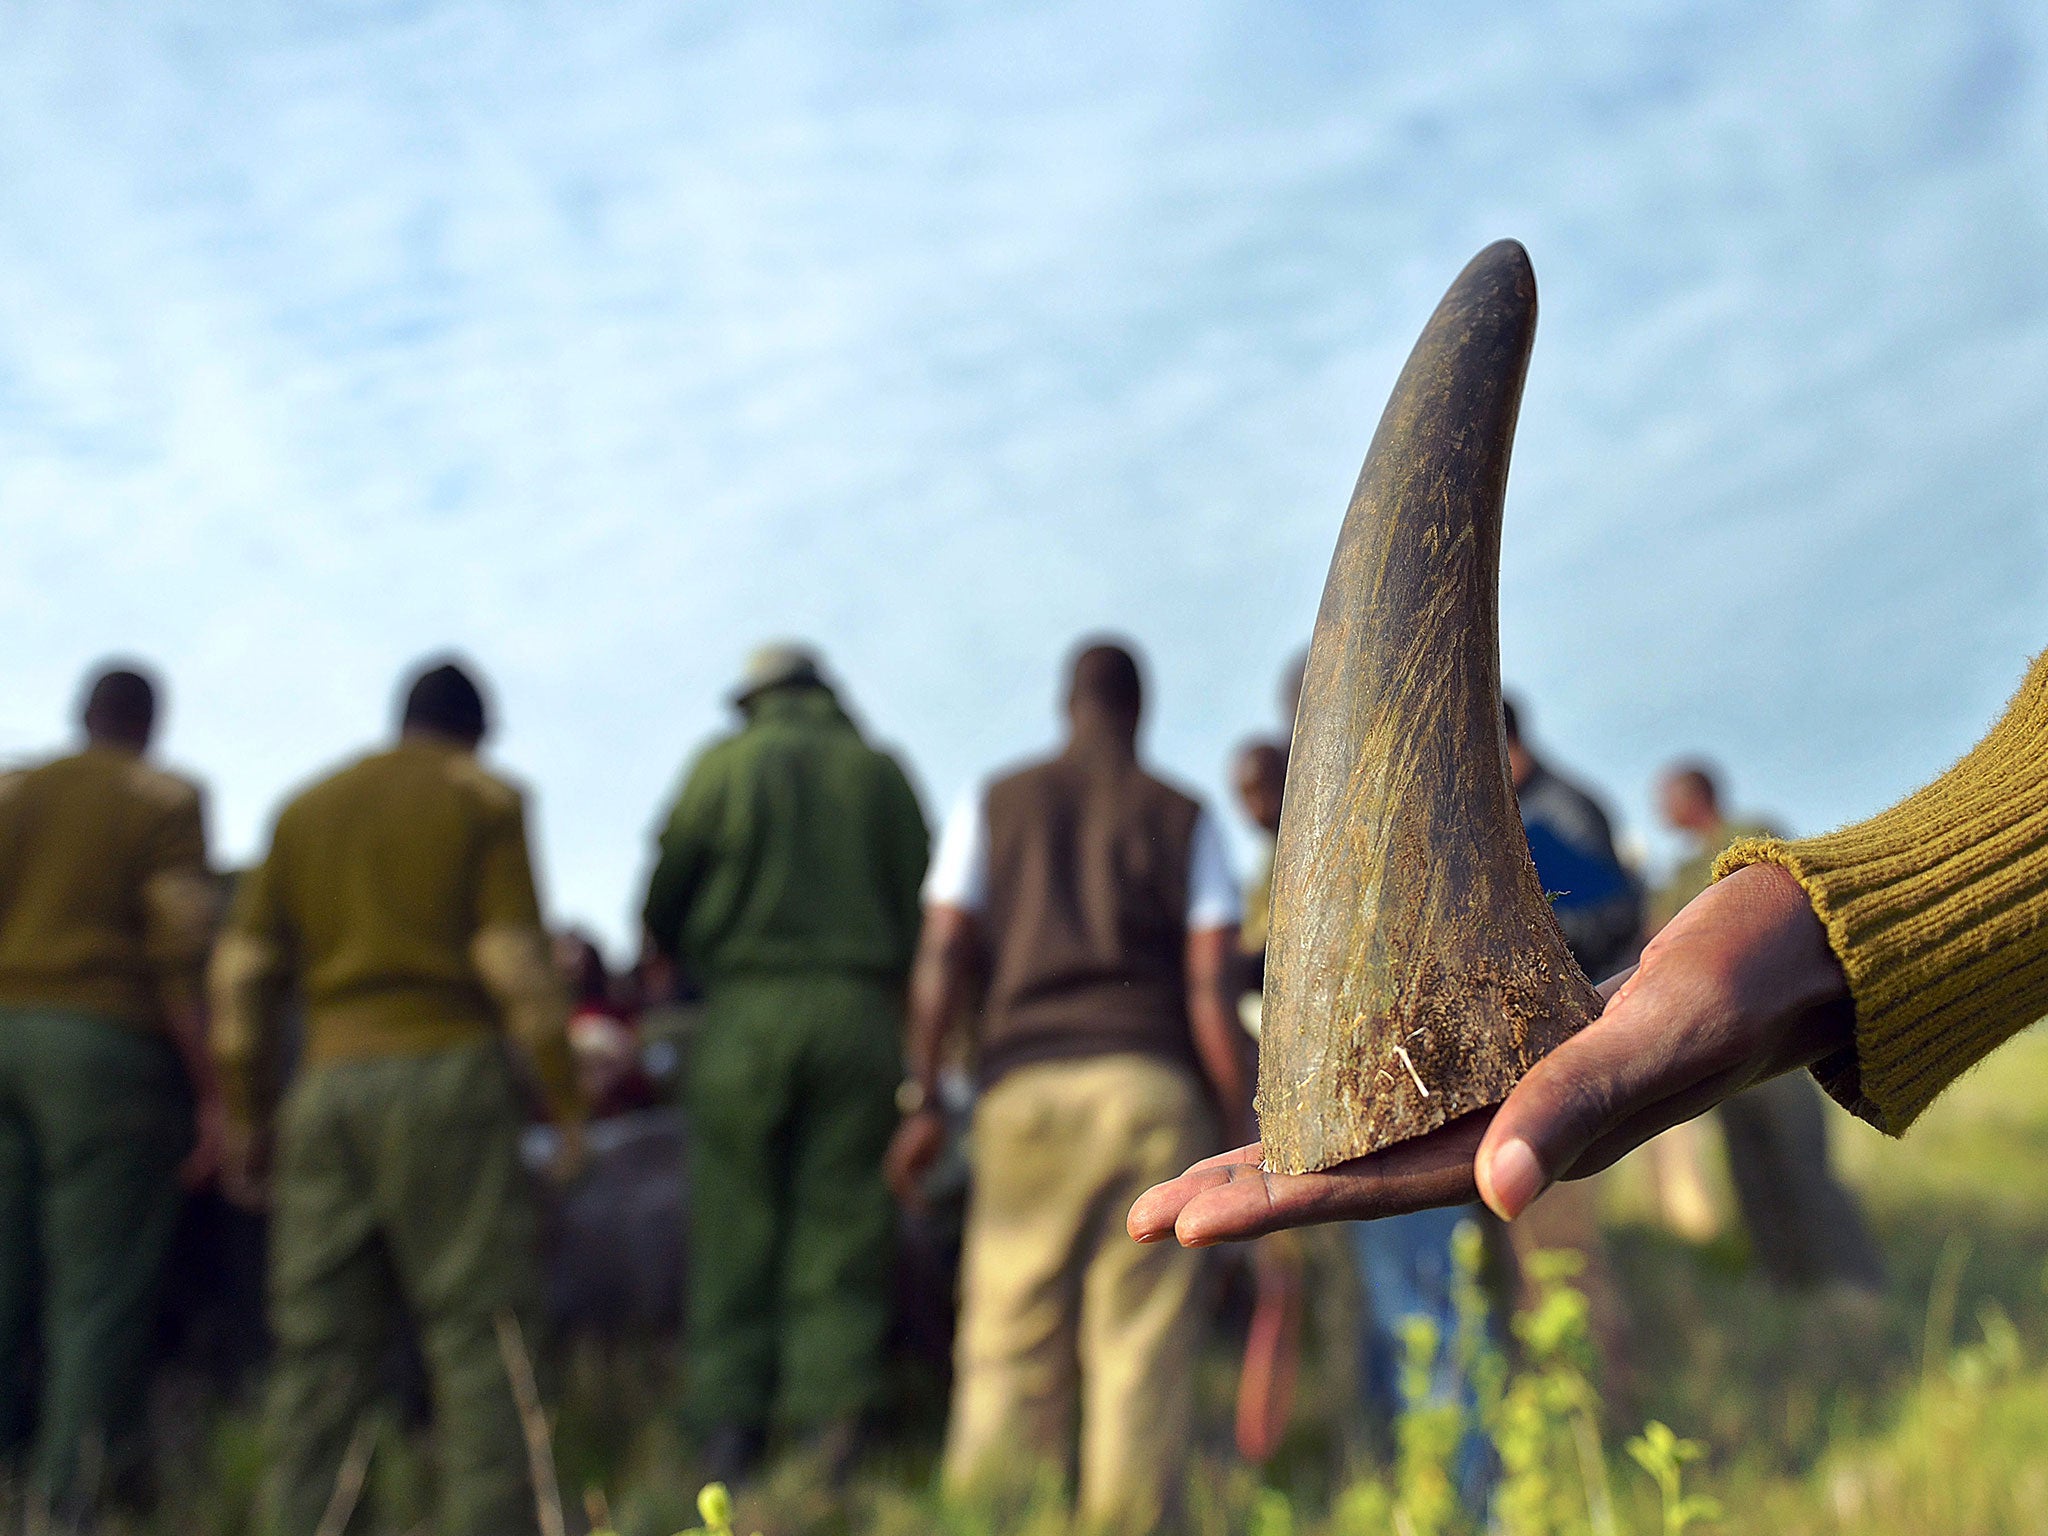 A member of a rhino-translocation team at Lewa wildlife conservancy holds-on to the sawed-off tip of a rhino horn as others process a sedated Black rhinocerous for general health condition in the background.